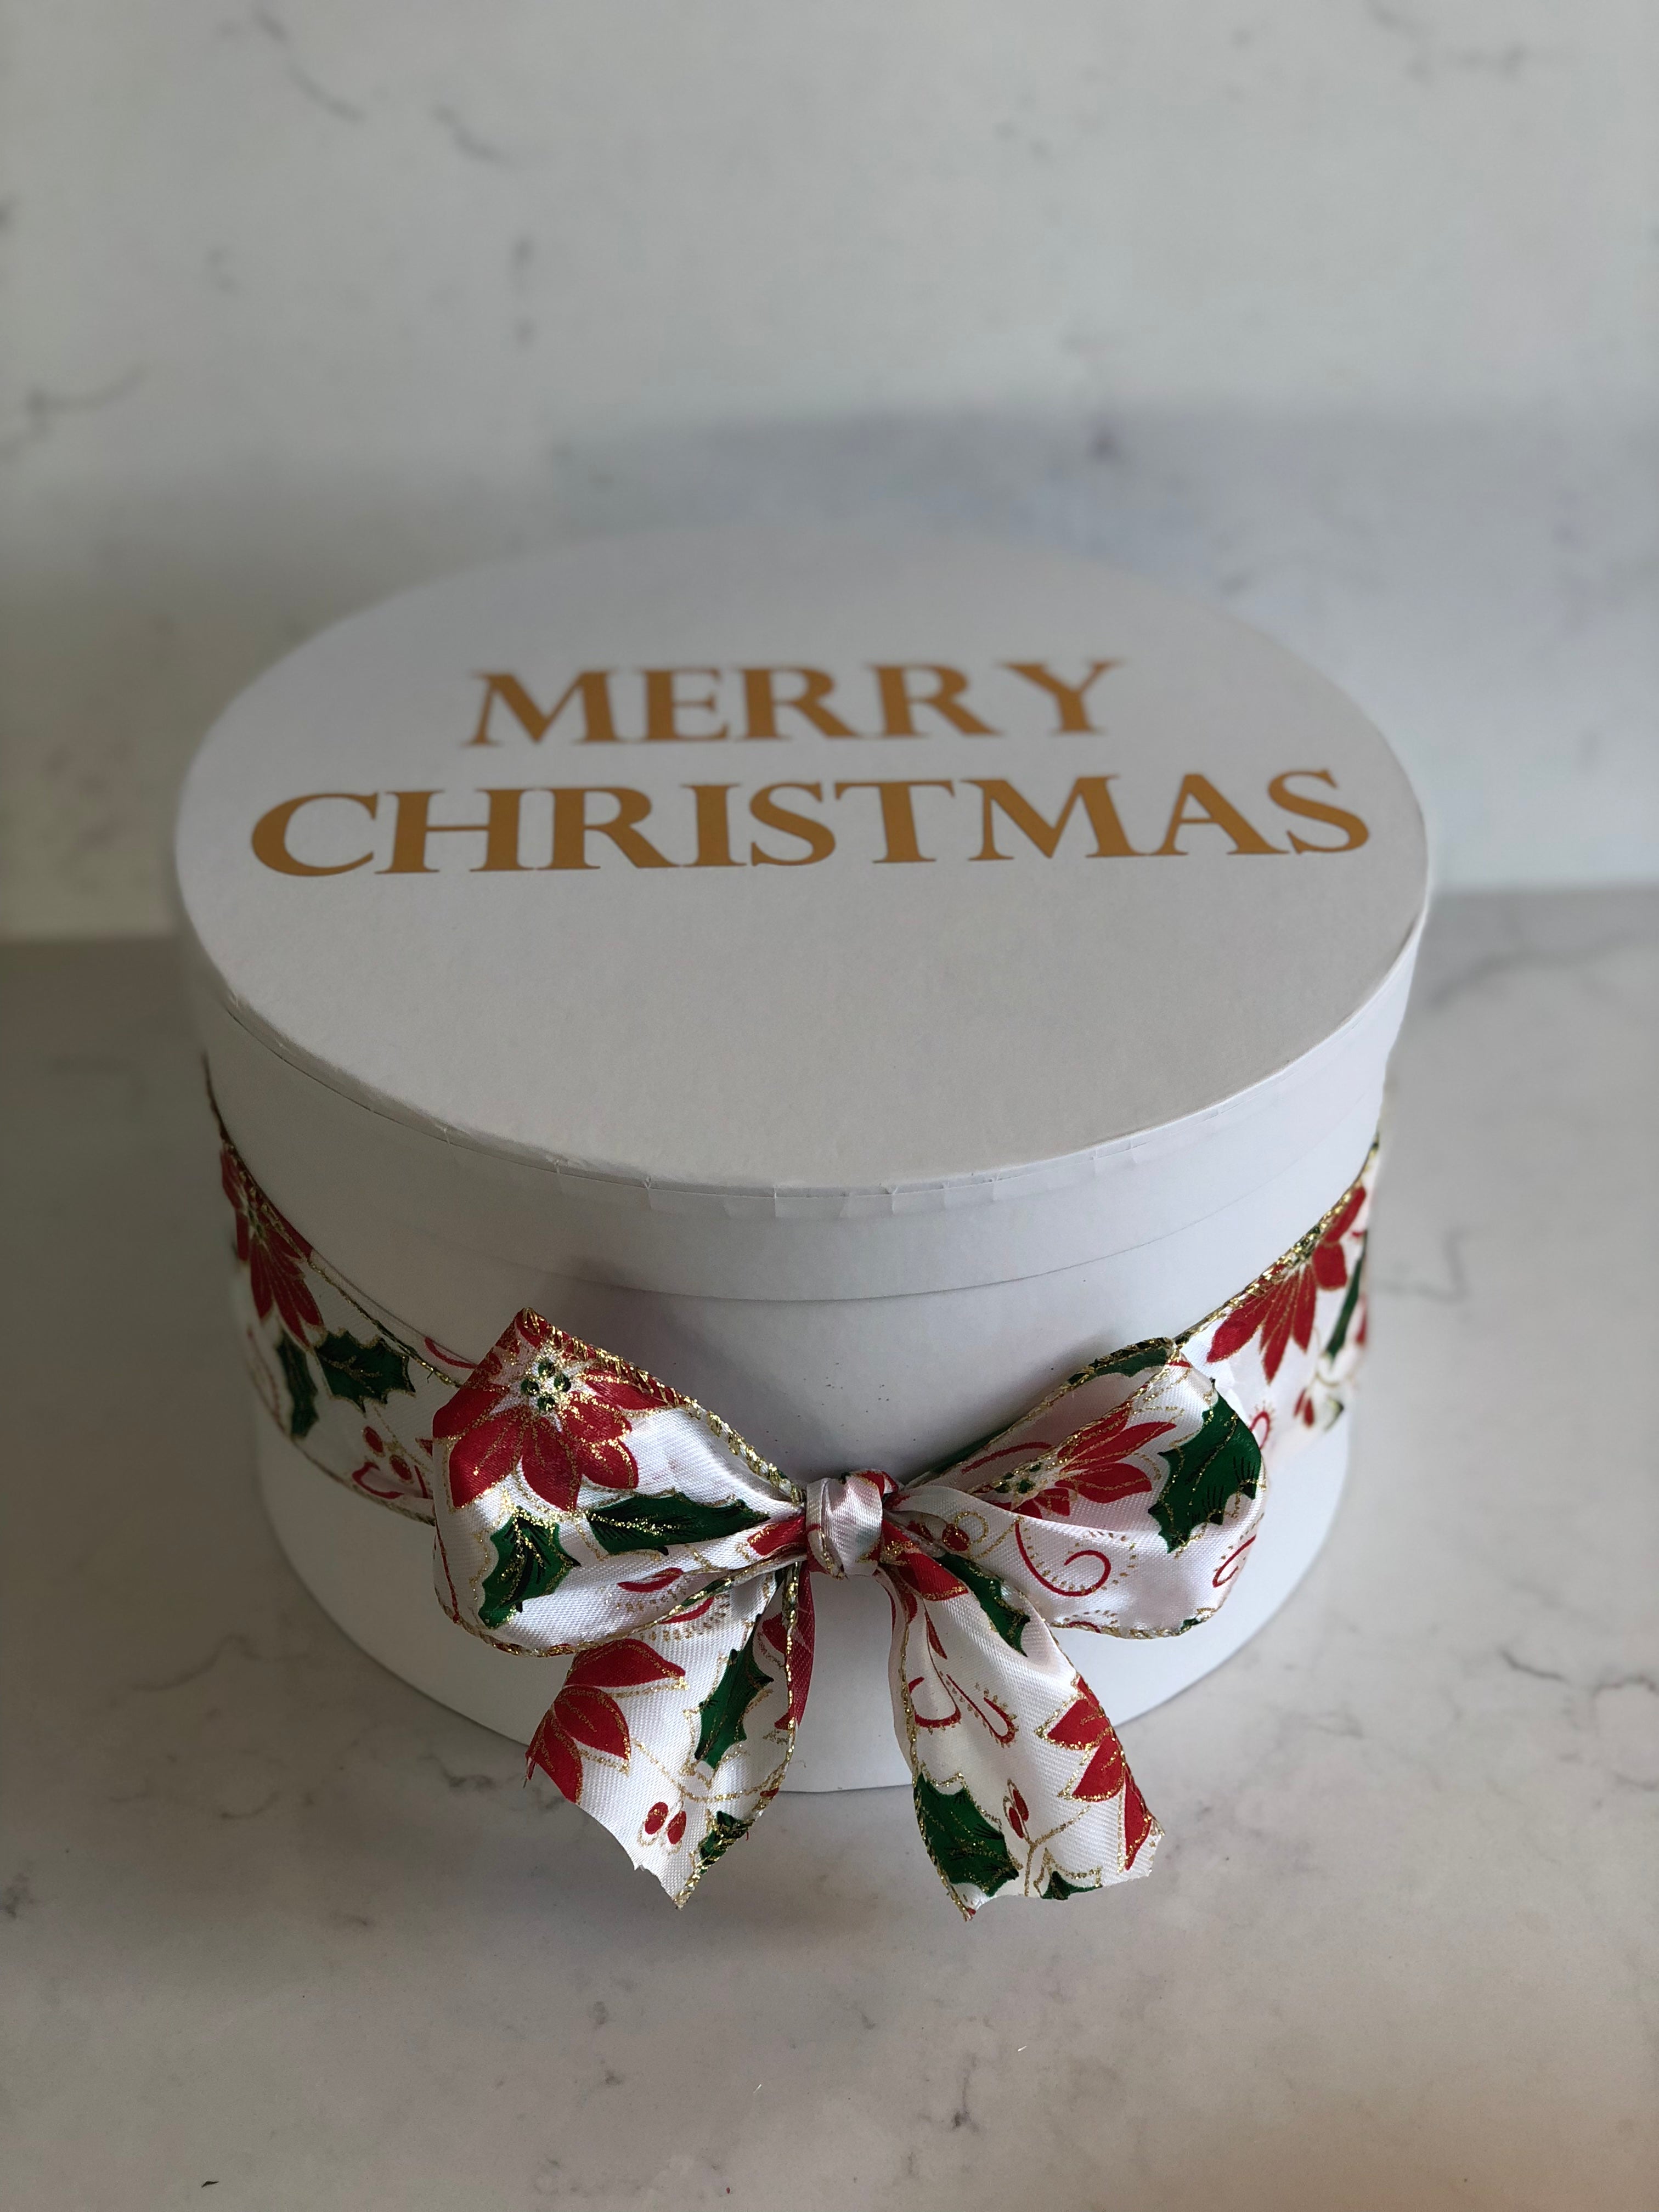 Christmas dessert and floral gift box